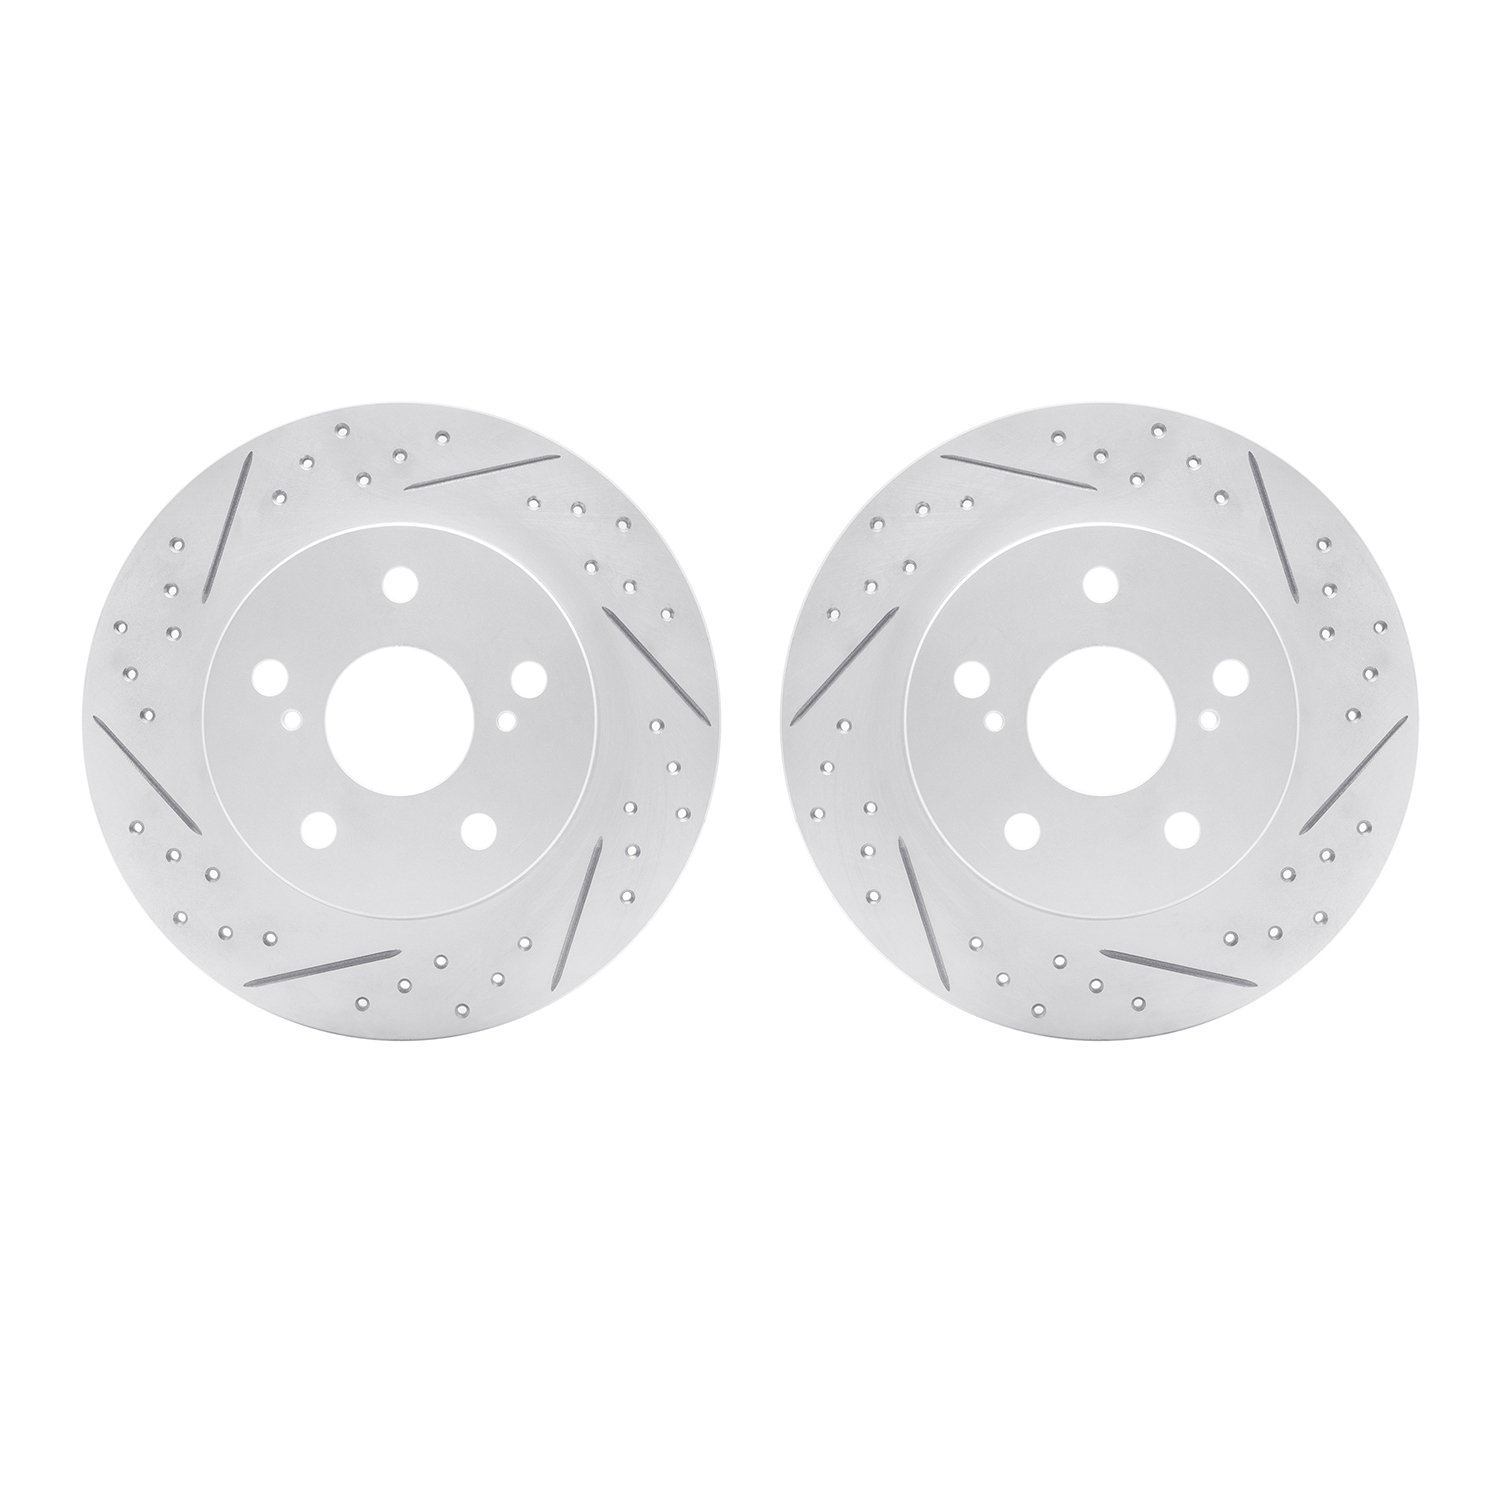 2002-91003 Geoperformance Drilled/Slotted Brake Rotors, 2011-2016 Lexus/Toyota/Scion, Position: Rear